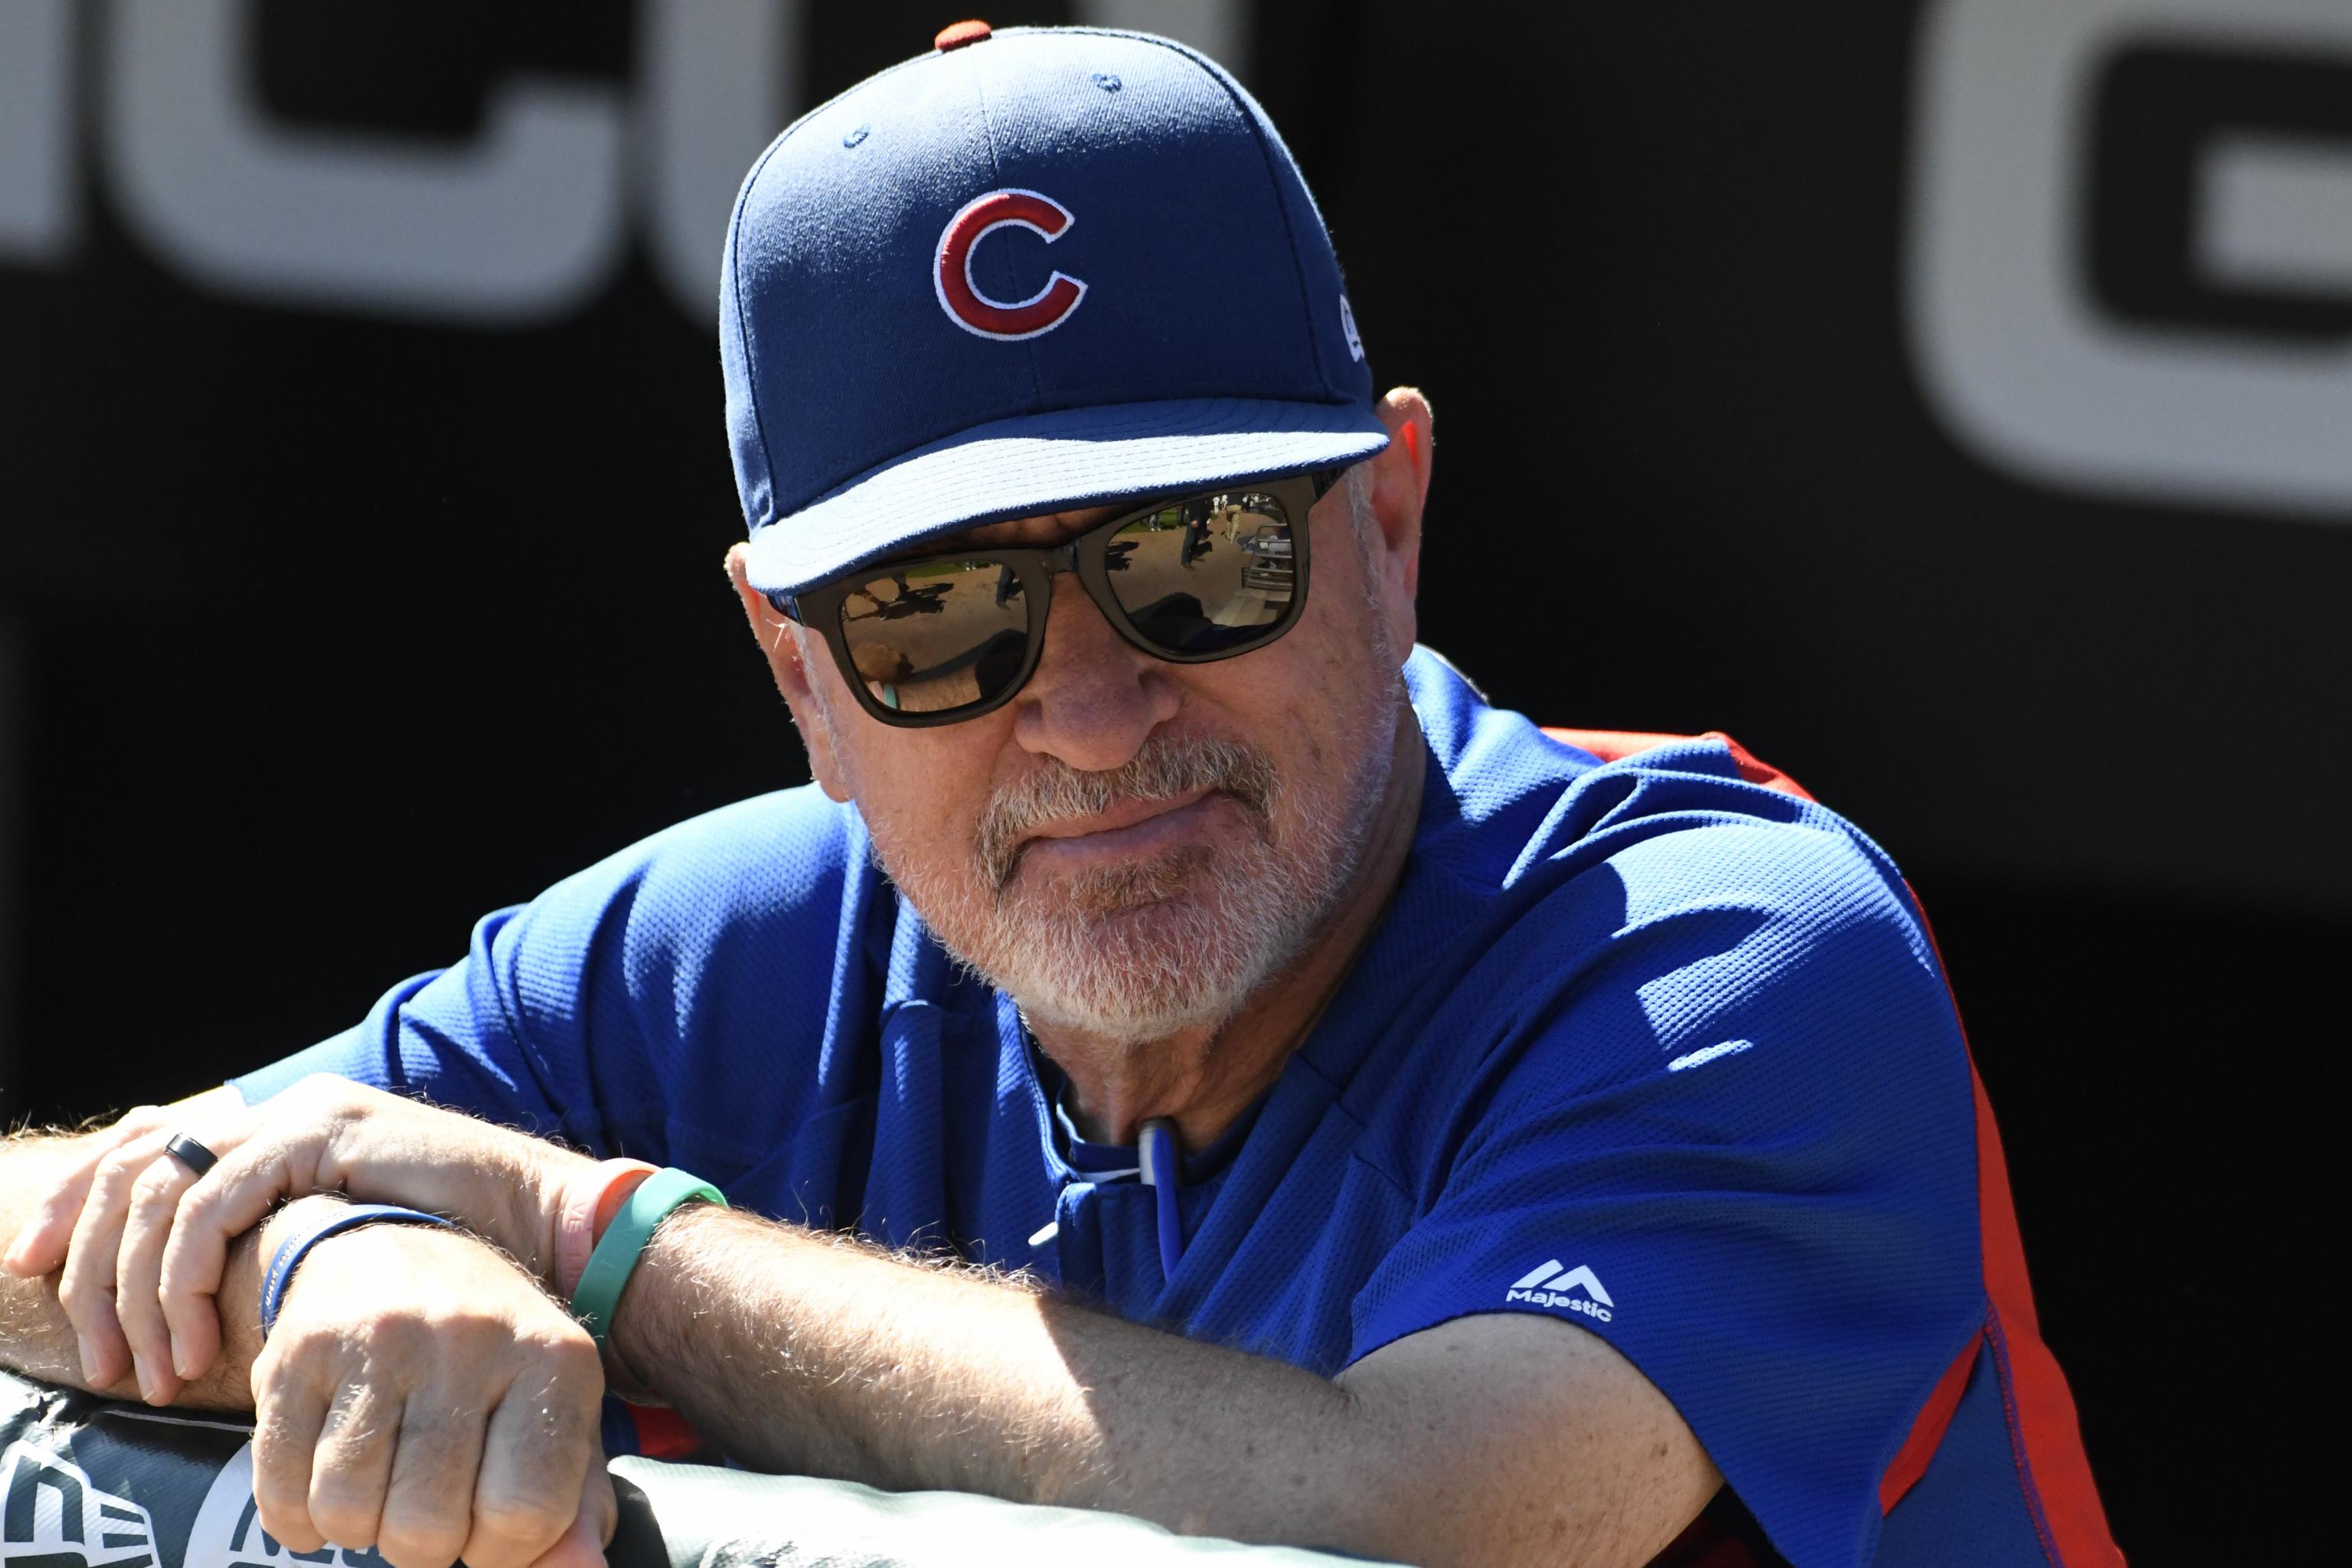 Joe Maddon's Respect 90 Foundation Partners With Citypak To